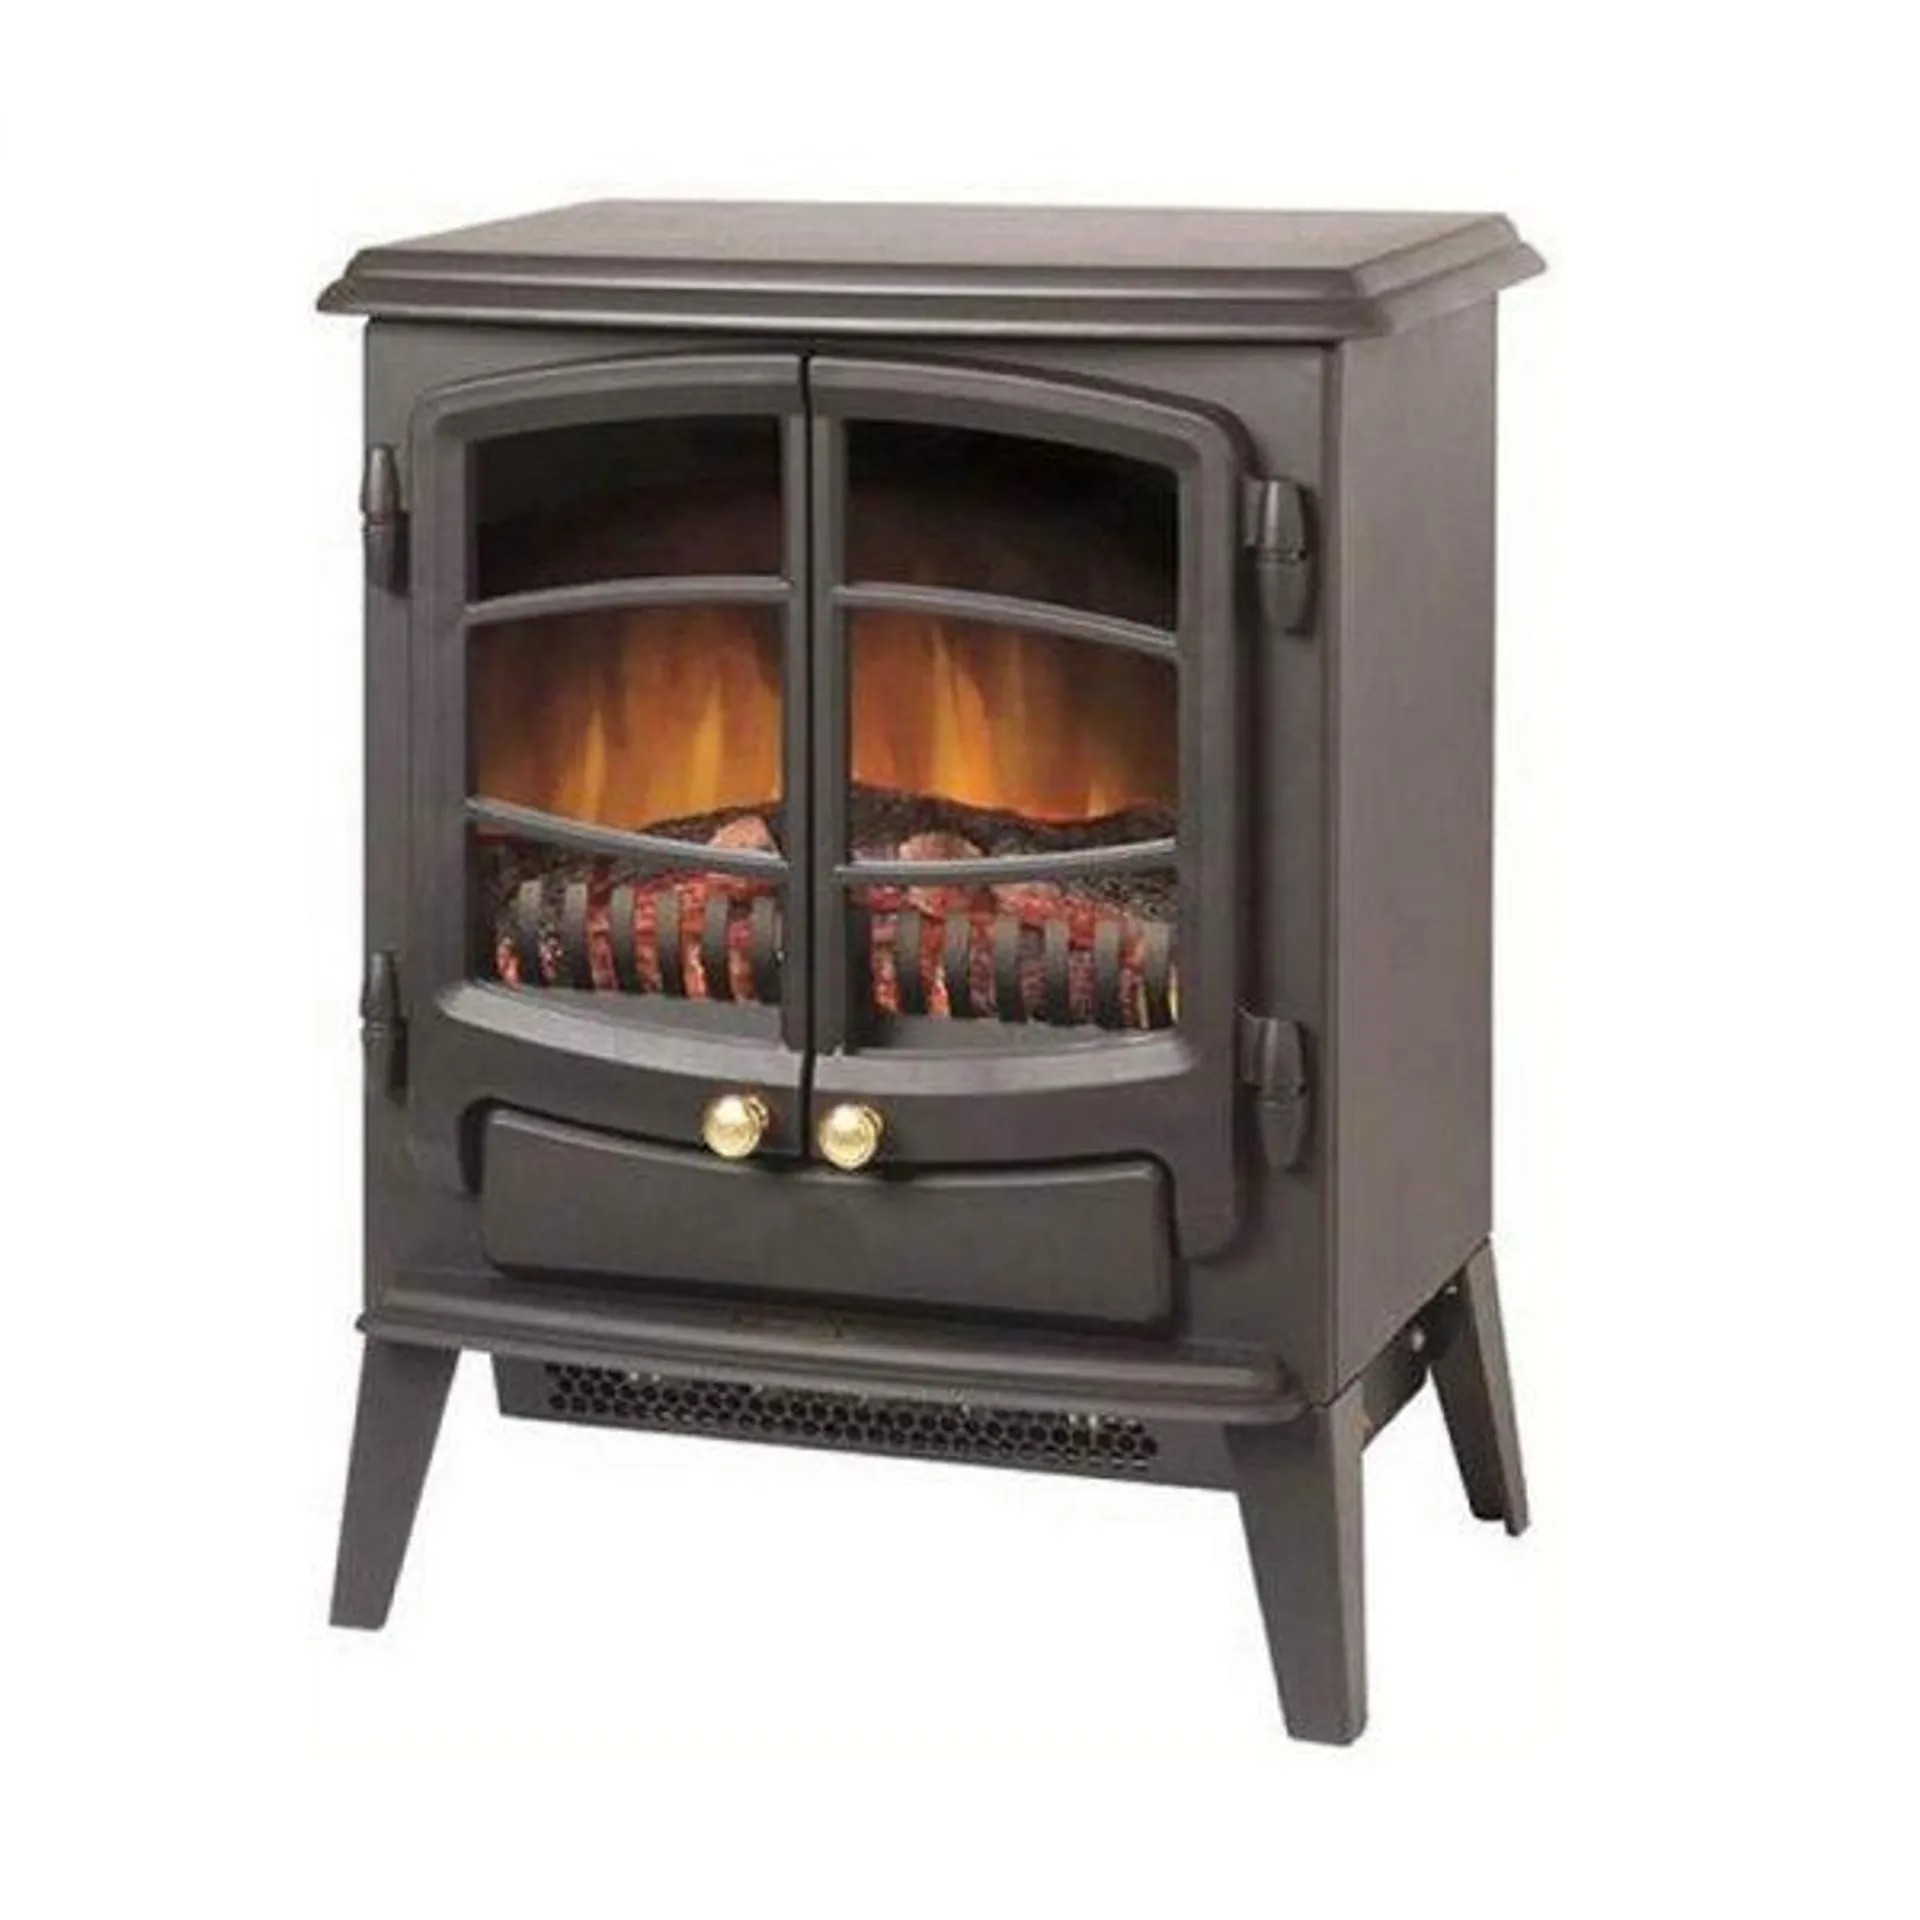 Dimplex 2kw Electric Optiflame Stove